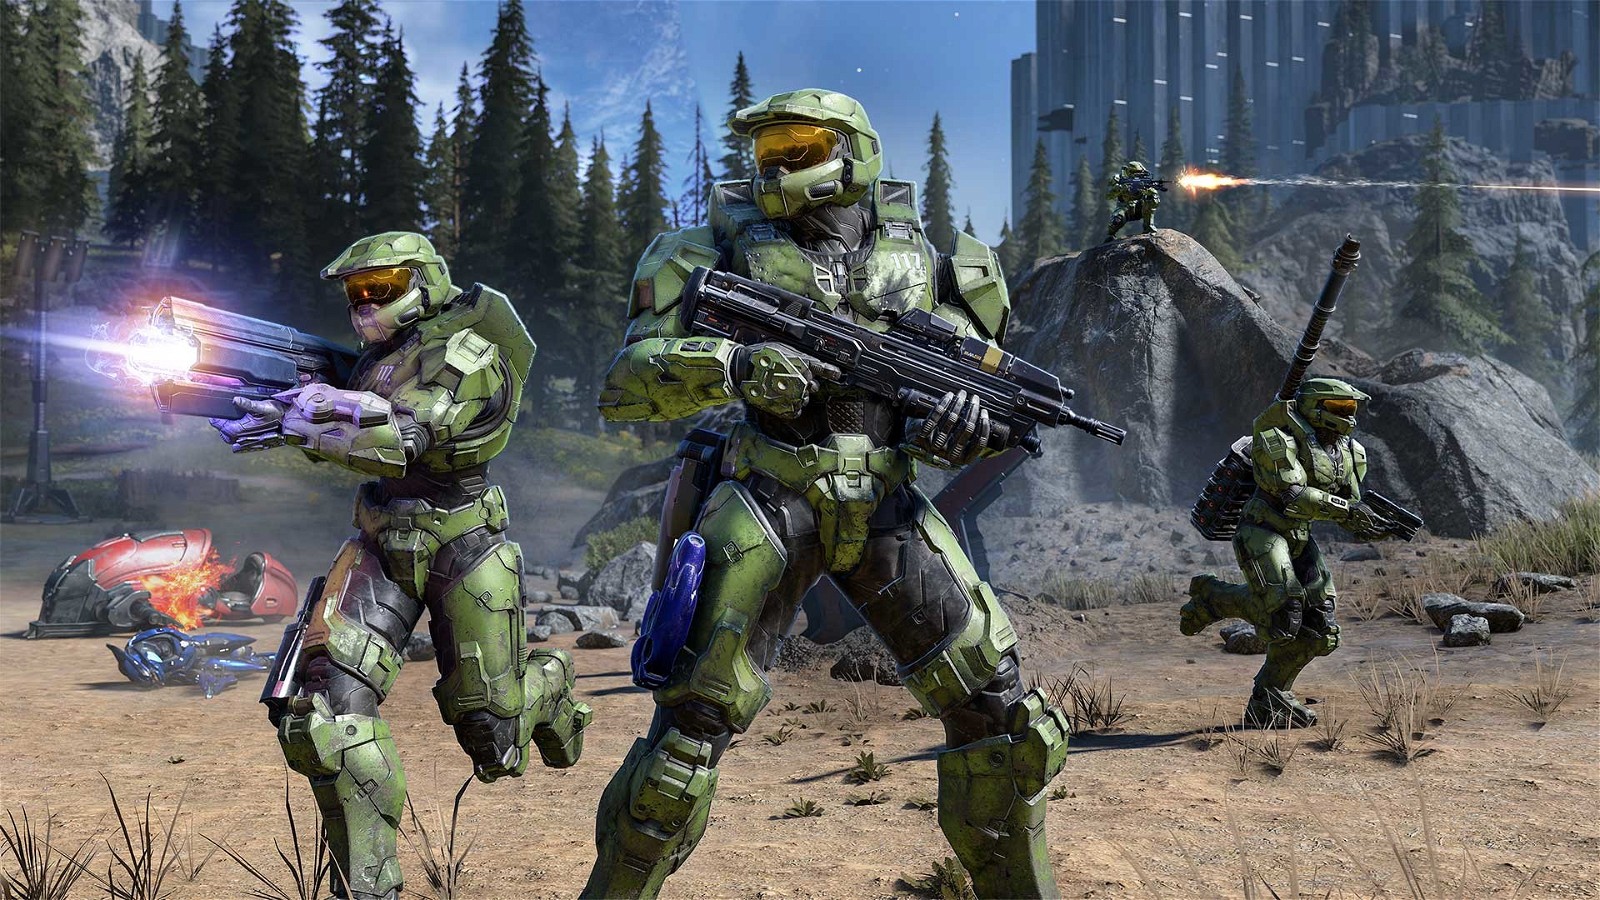 Even though Halo Infinite accrued positive reviews, fans were divided on the campaign's direction.